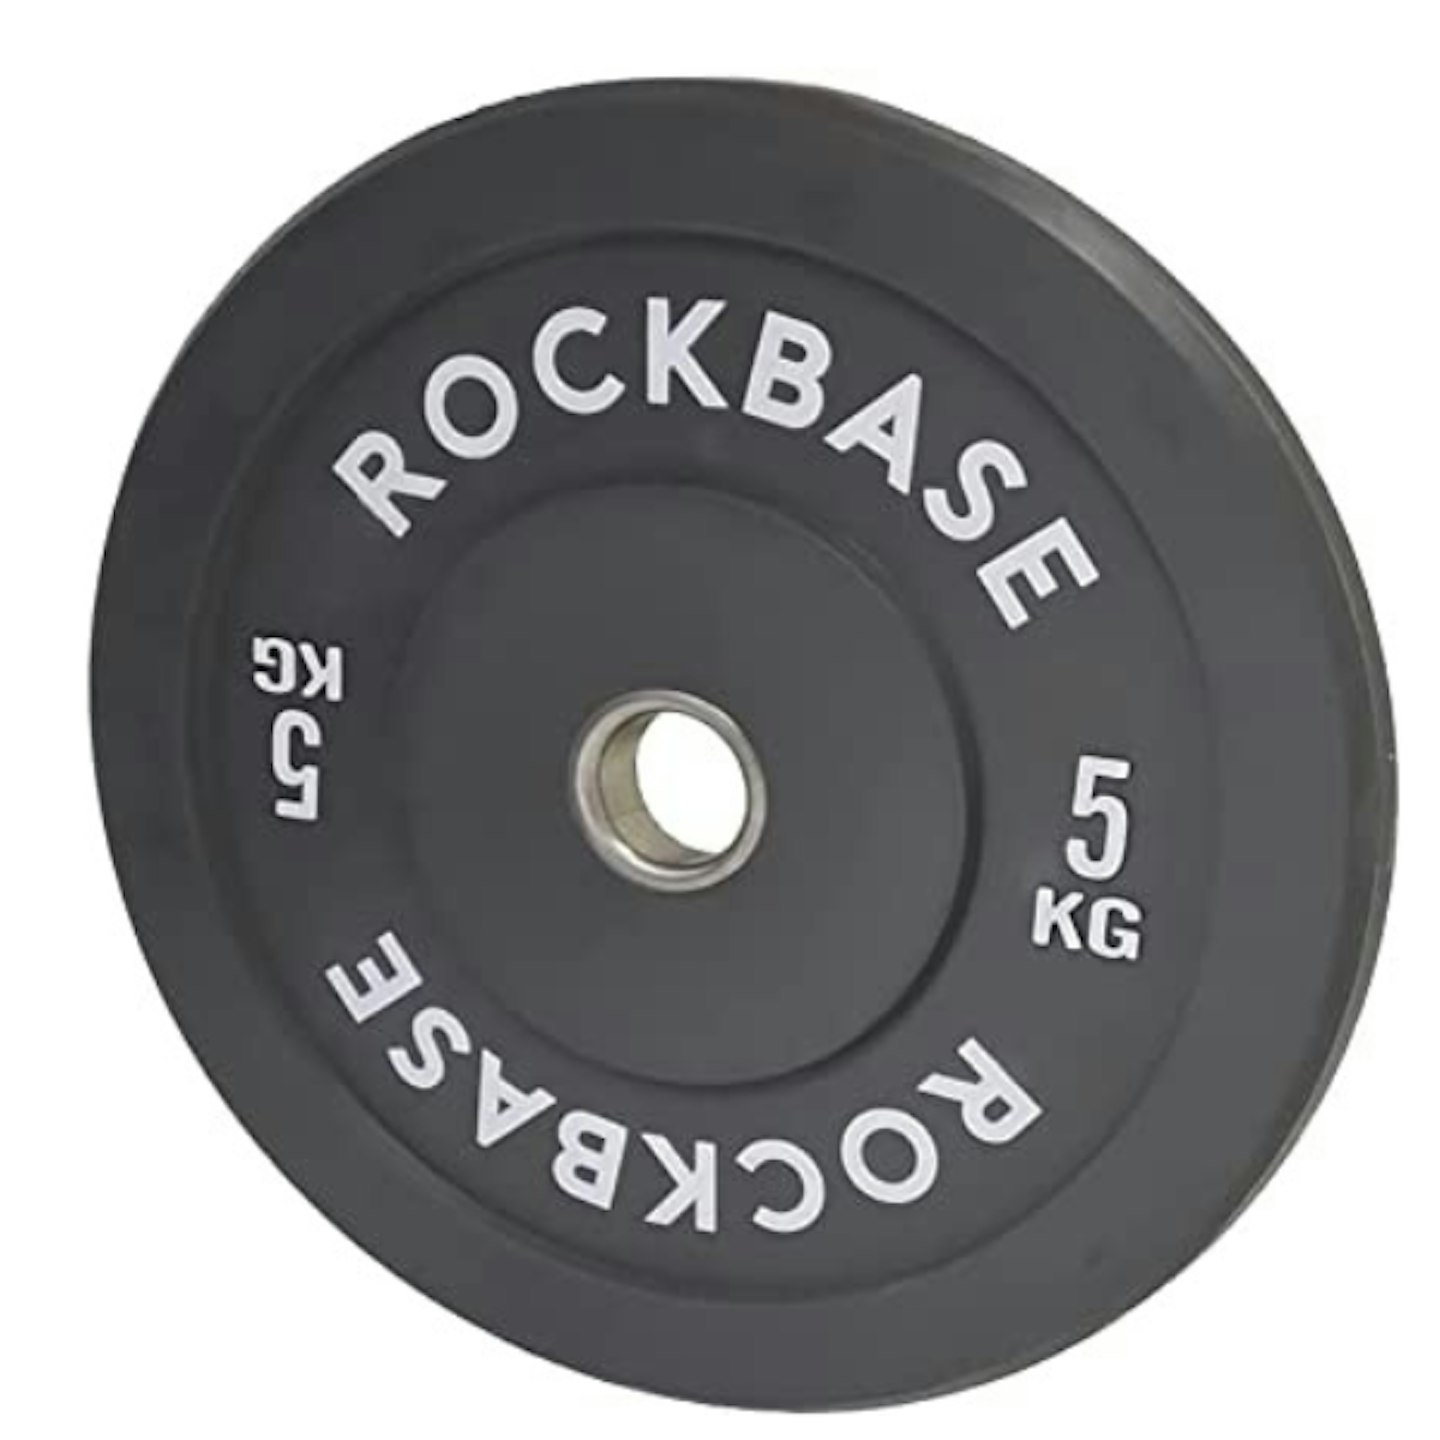 Olympic Weight Plate Disc Rubber Coated Cast Iron Bumper Weight Lifting Plates